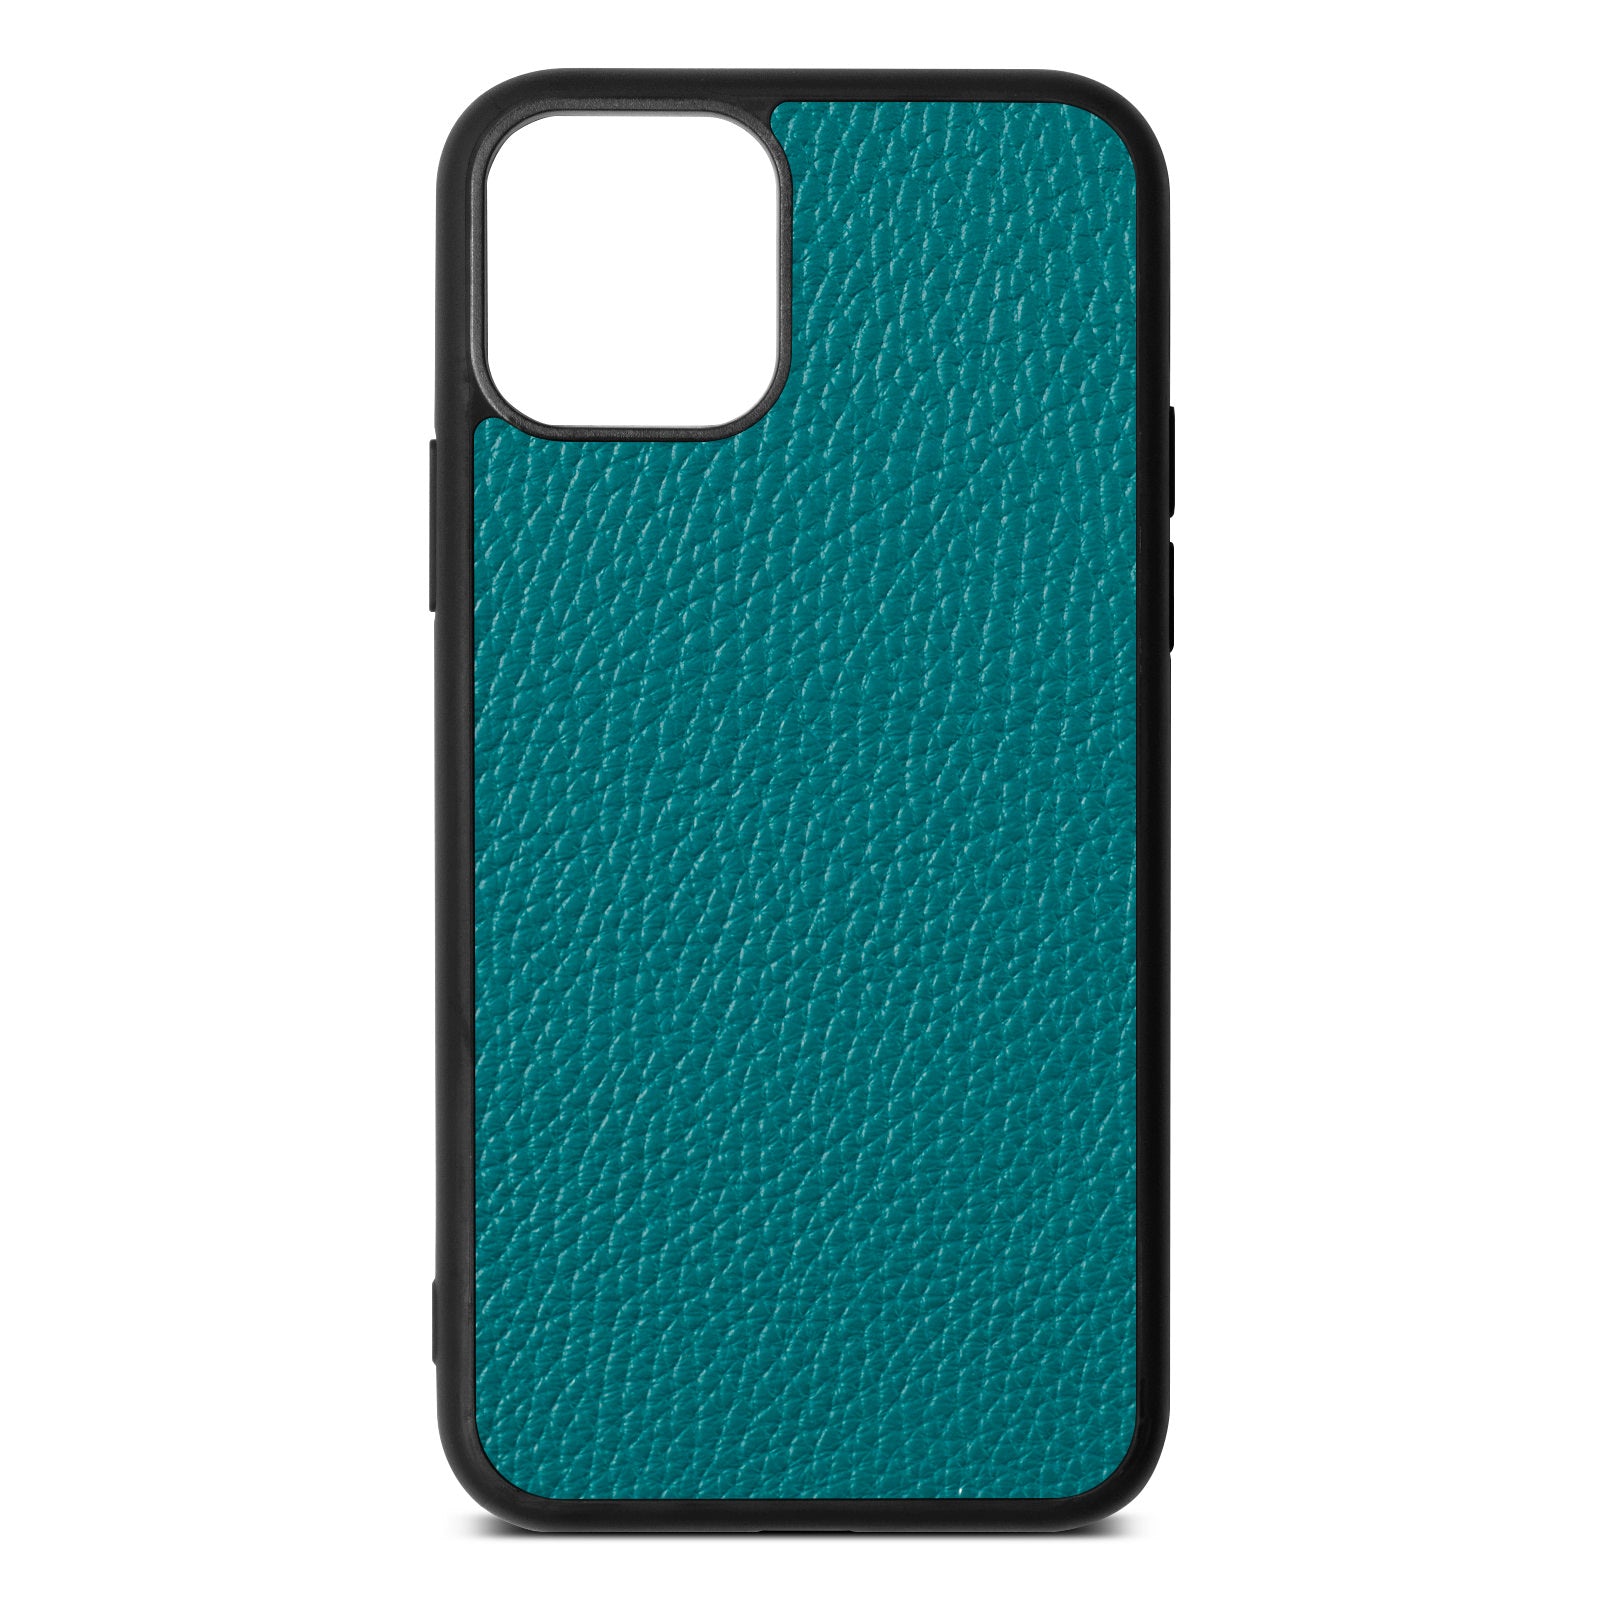 Blank iPhone 11 Pebble Green Leather iPhone Case